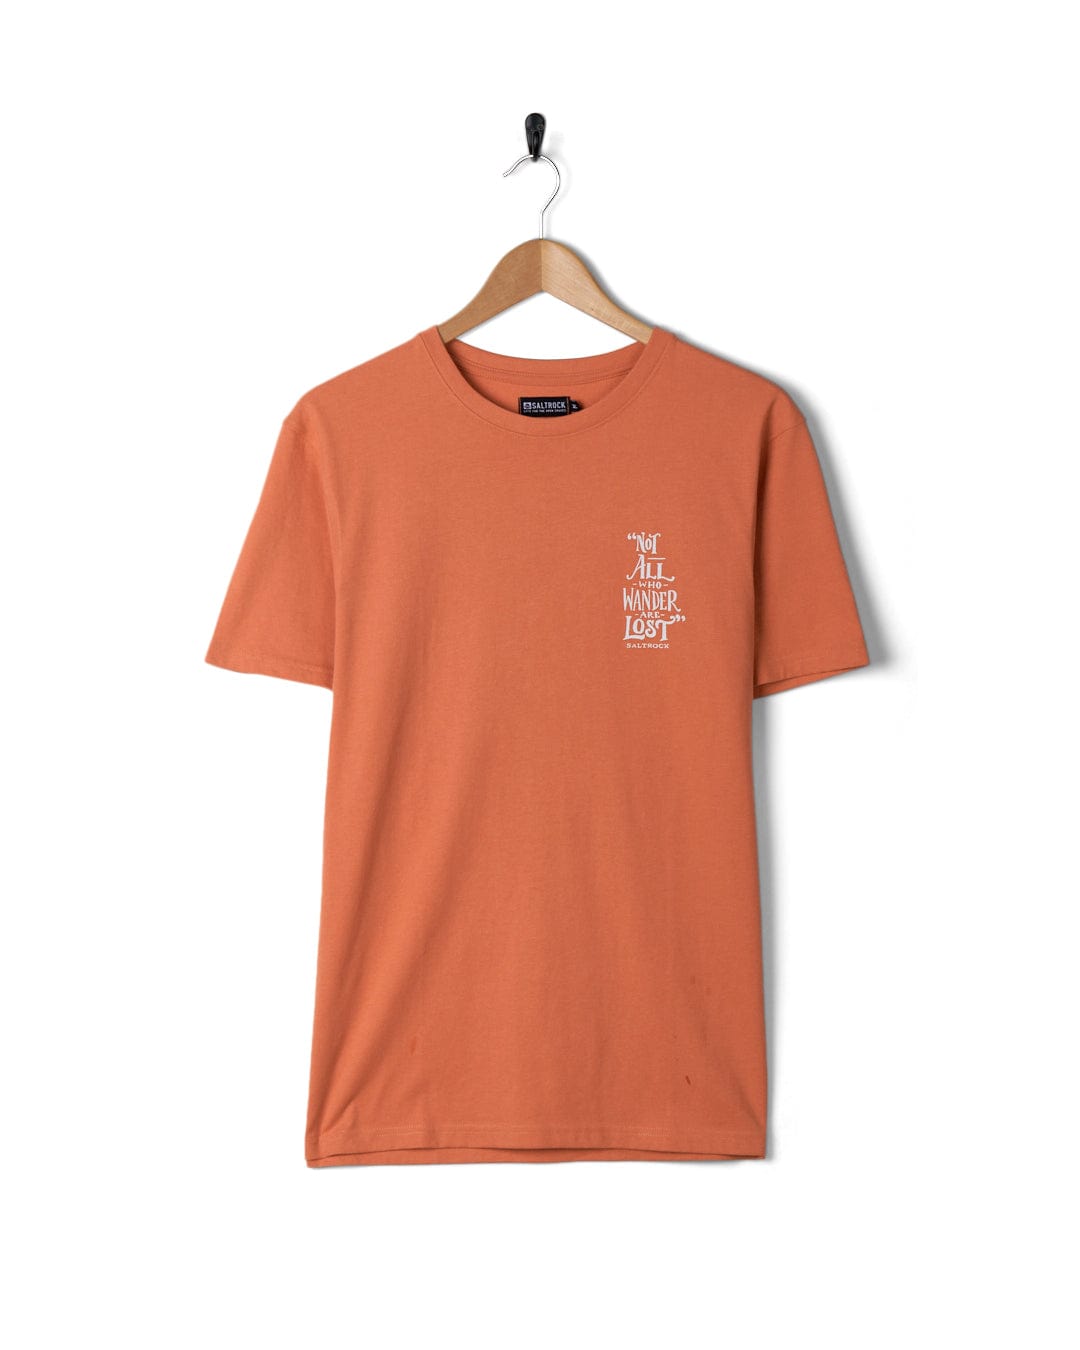 A Saltrock Lost Ships - Mens Short Sleeve T-Shirt in orange with a white logo.